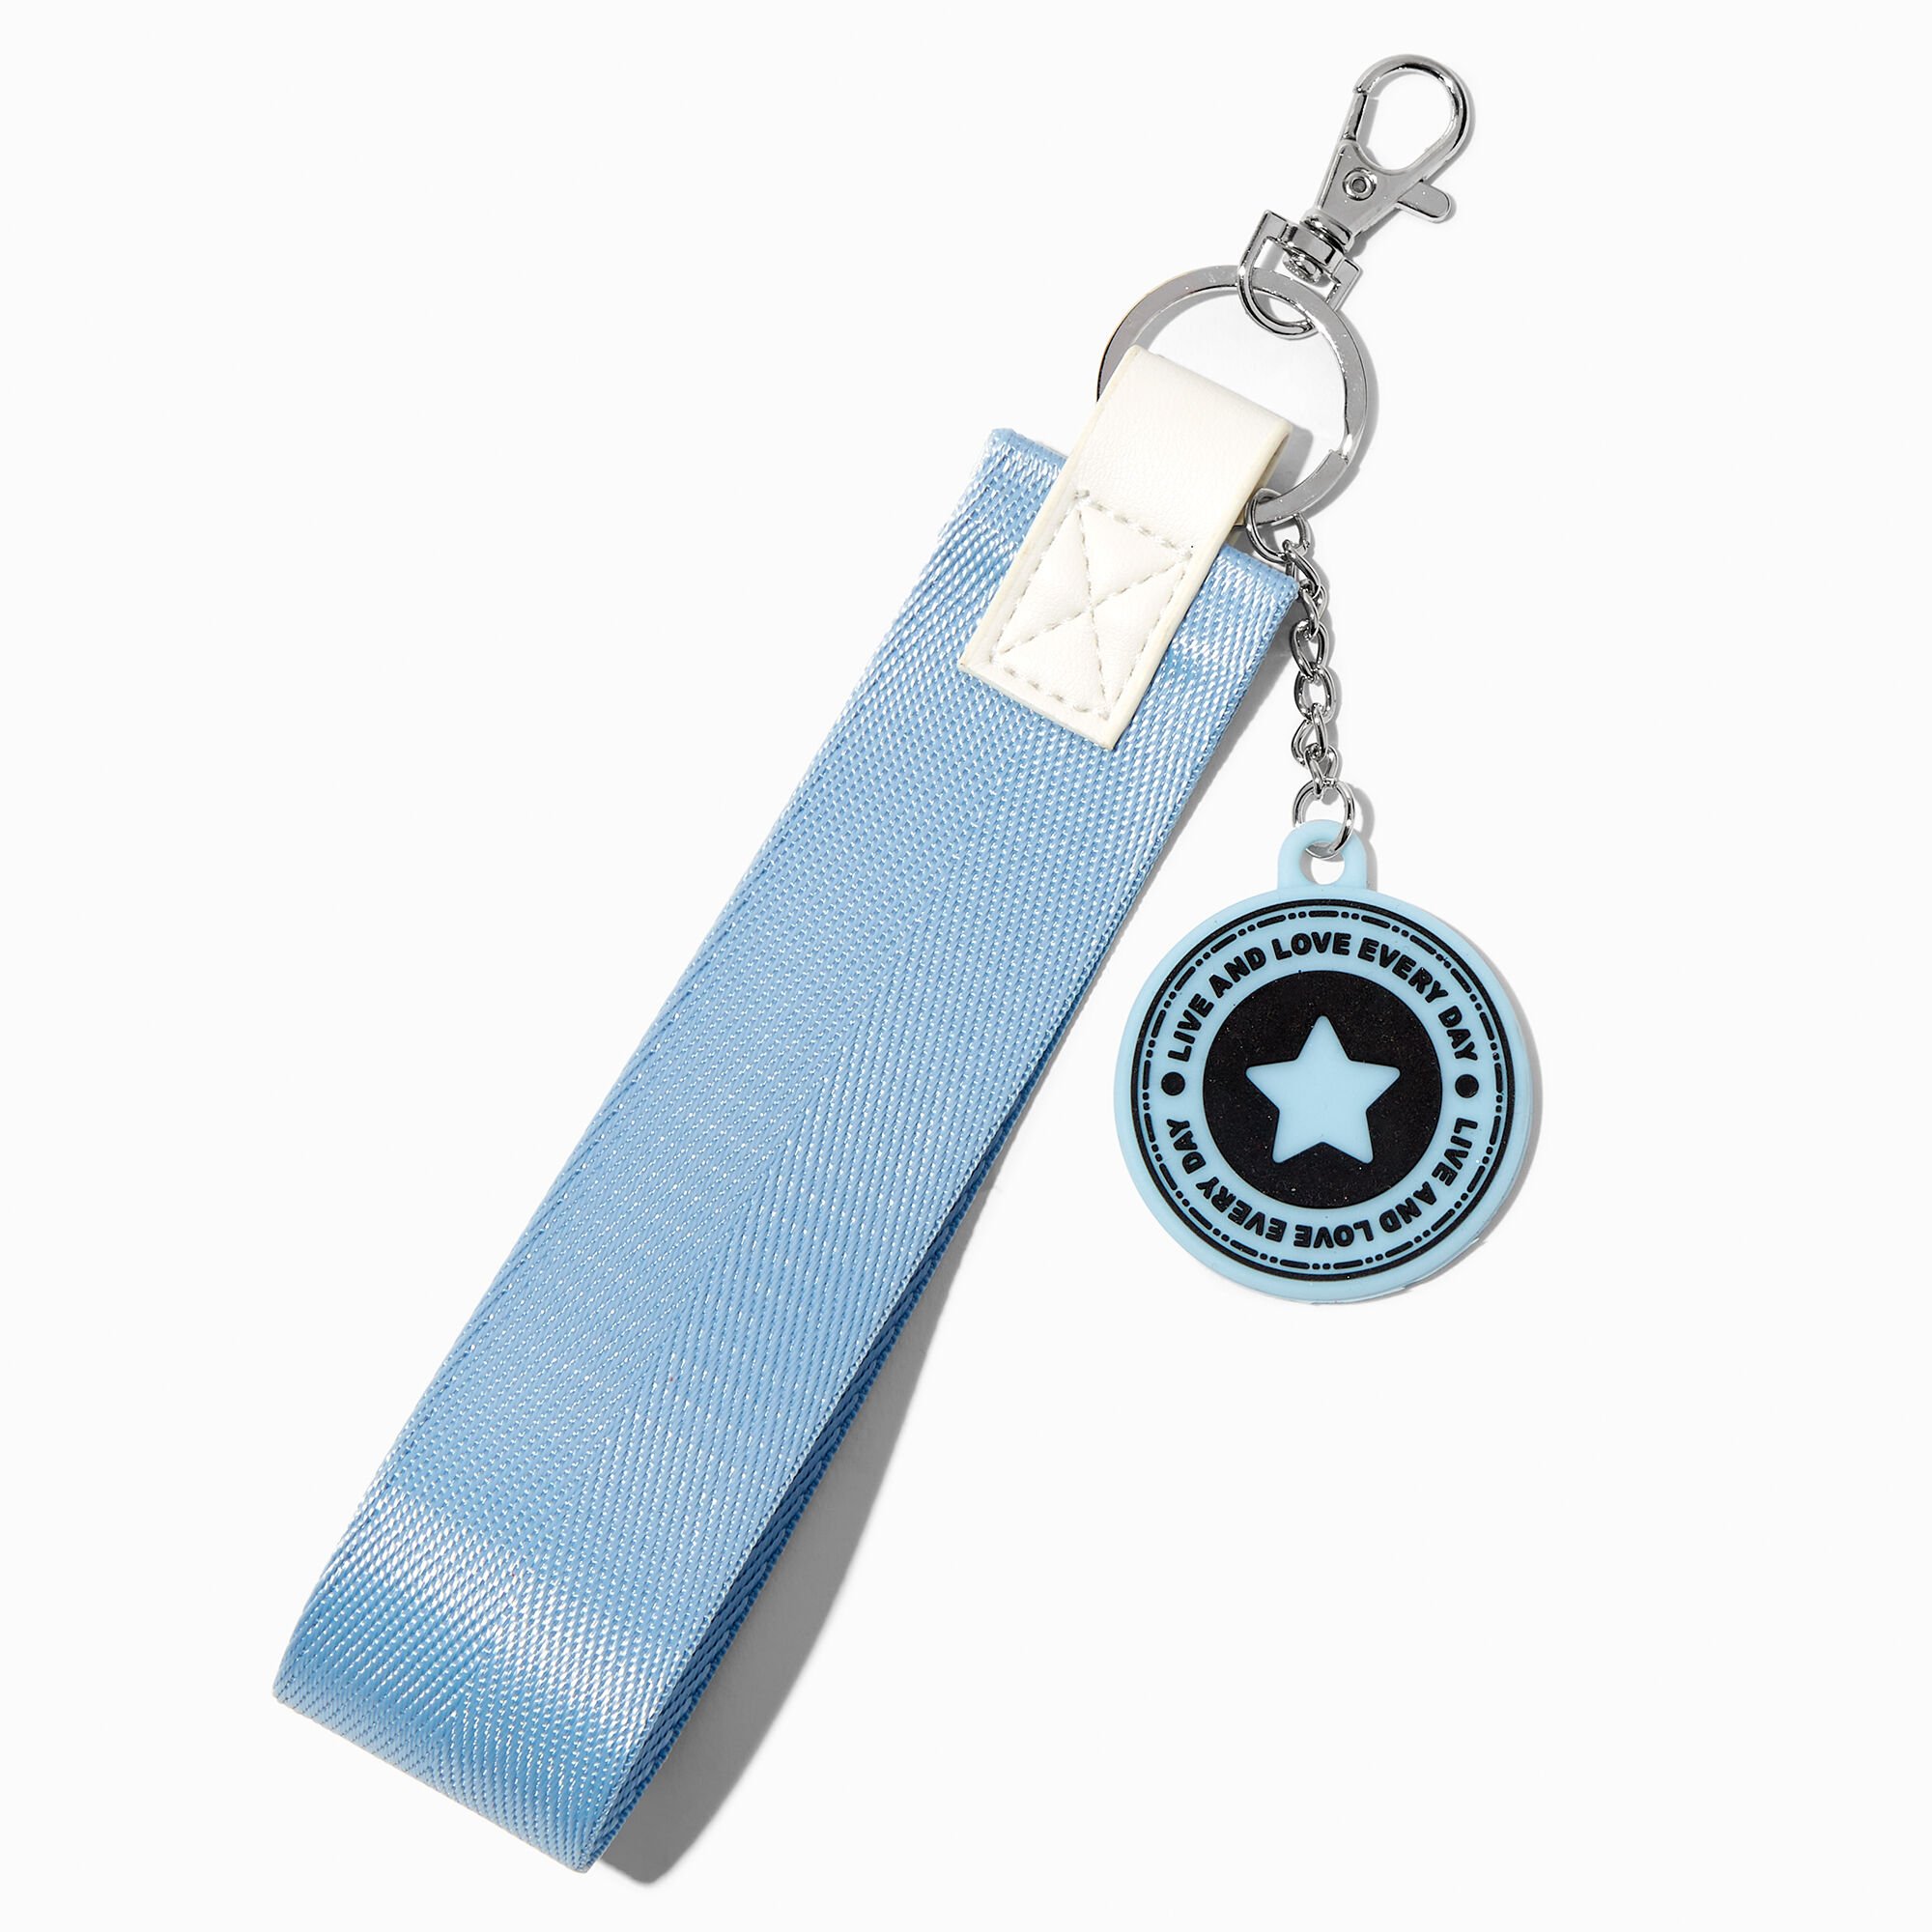 View Claires Ribbon Wrist Strap Keyring Blue information